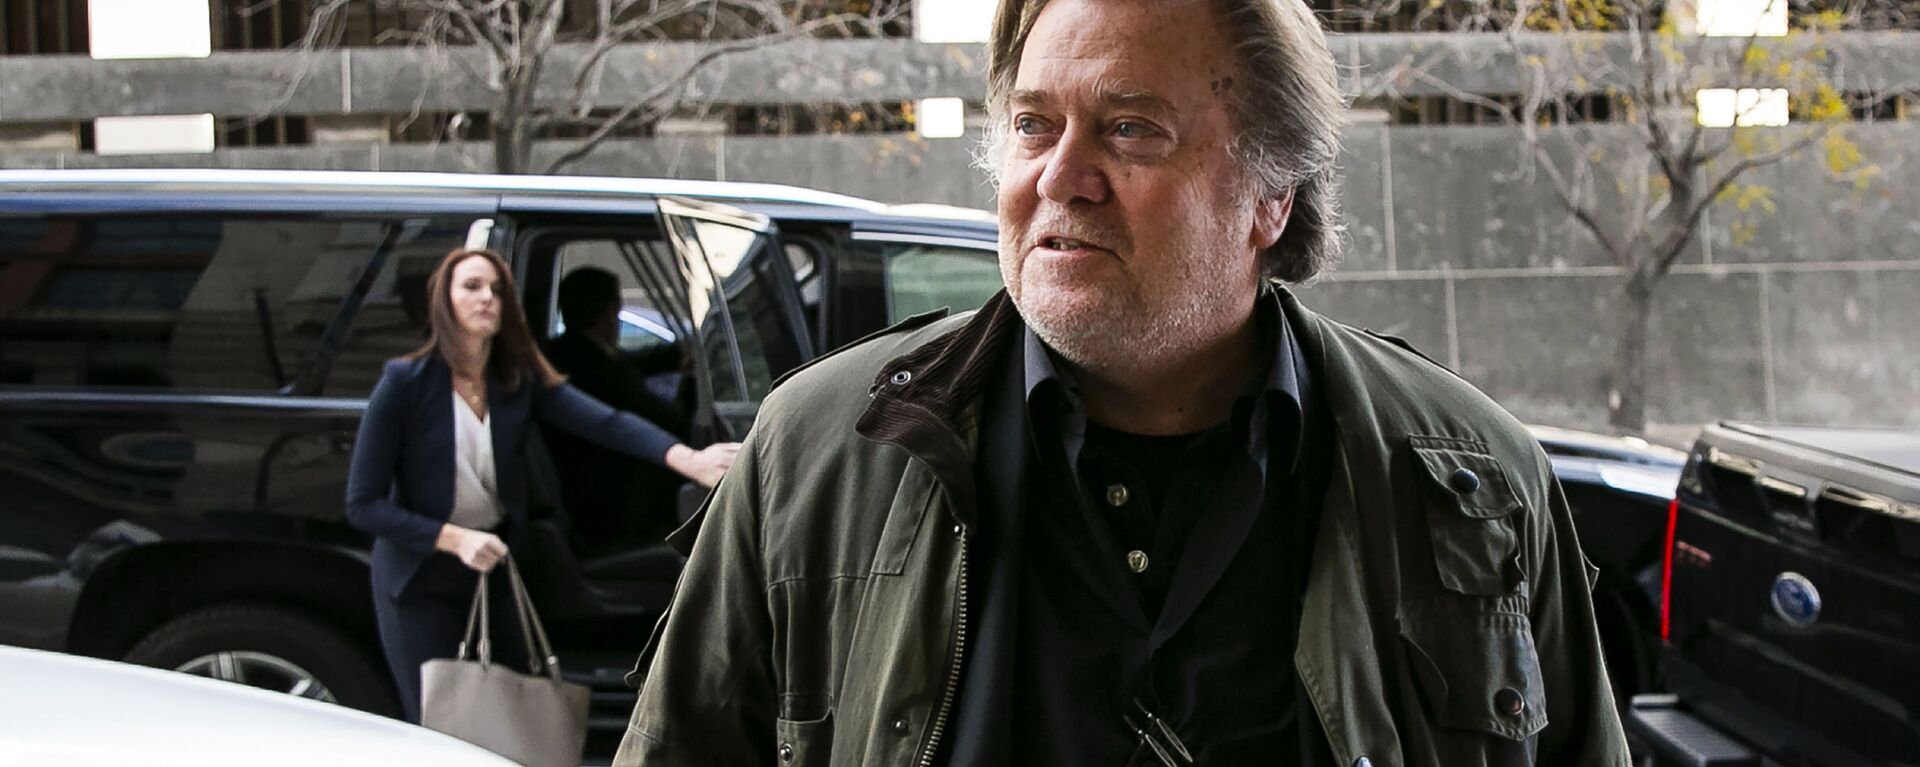 Former White House strategist Steve Bannon arrives to testify at the trial of Roger Stone, at federal court in Washington, Friday, Nov. 8, 2019.  - Sputnik International, 1920, 18.10.2021